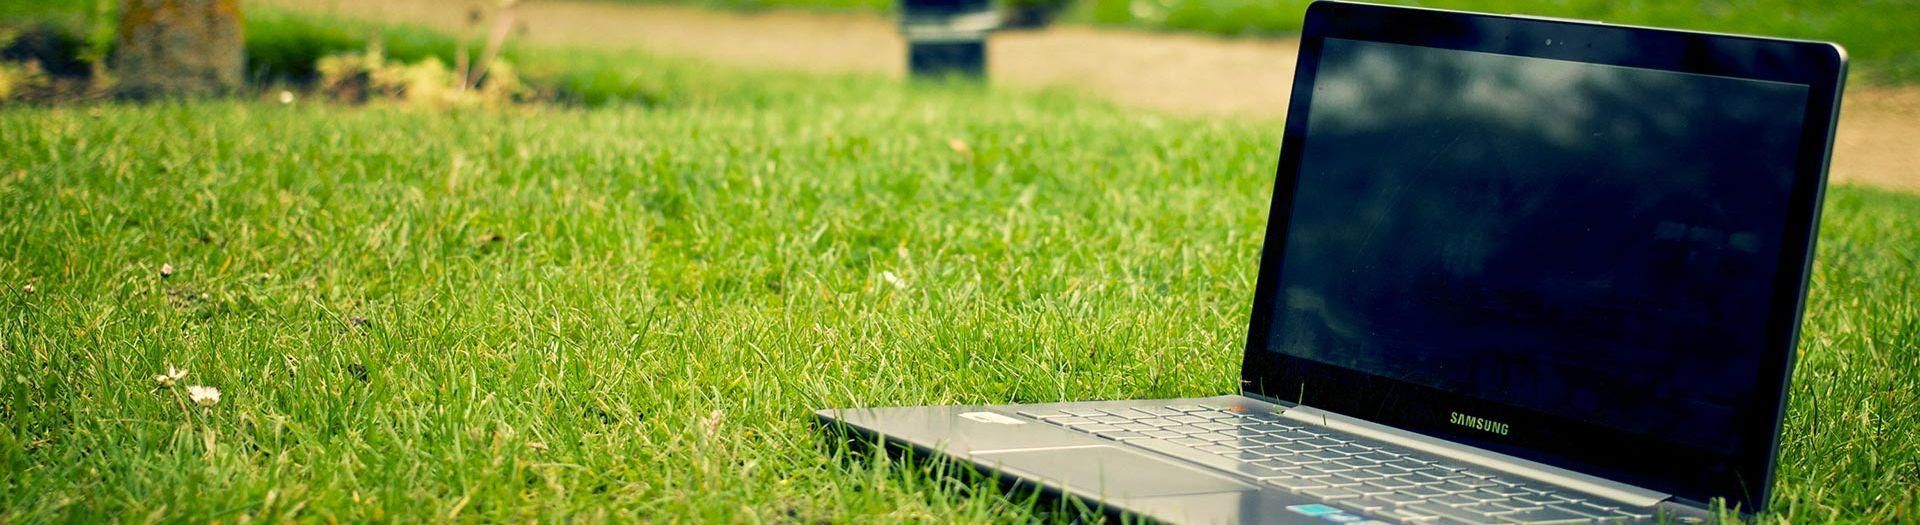 laptop-notebook-grass-meadow-1c6fa79c Direct